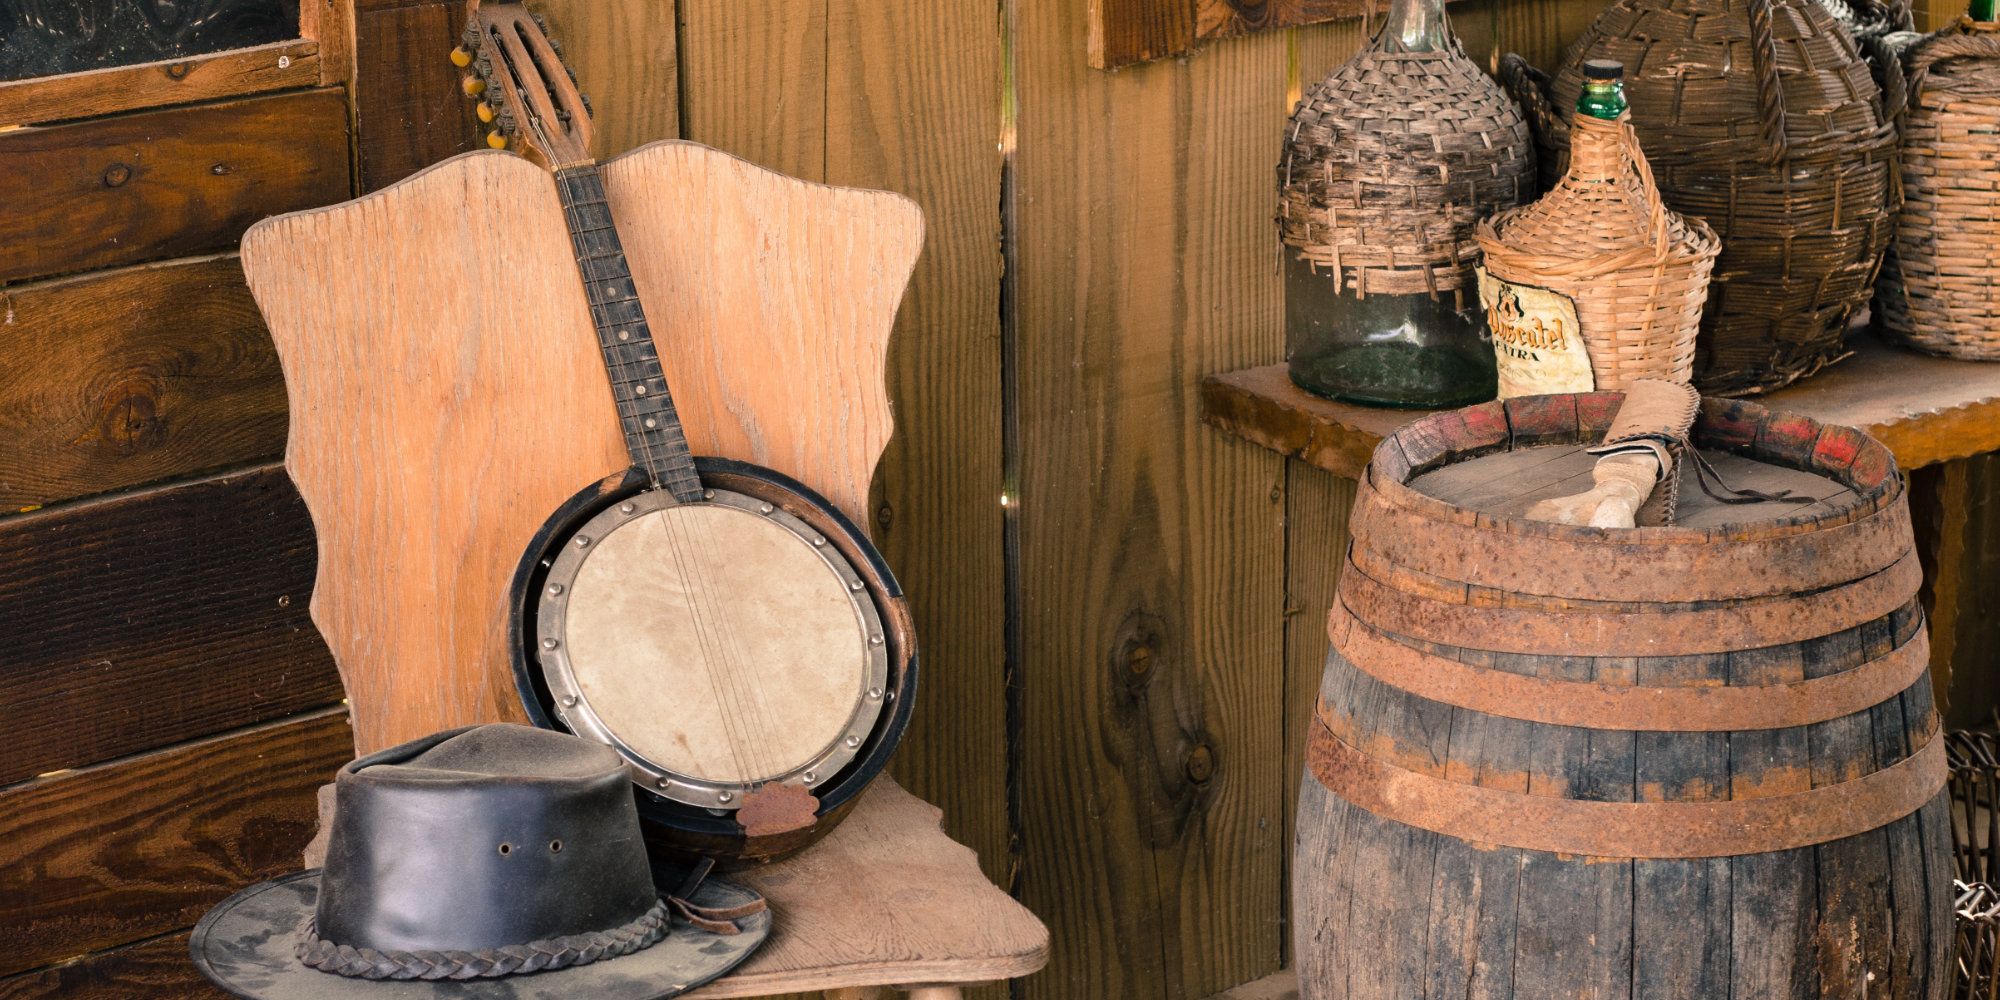 Western Style Decorations decorate a wall, including a barrel, banjo, and wicker bottles.